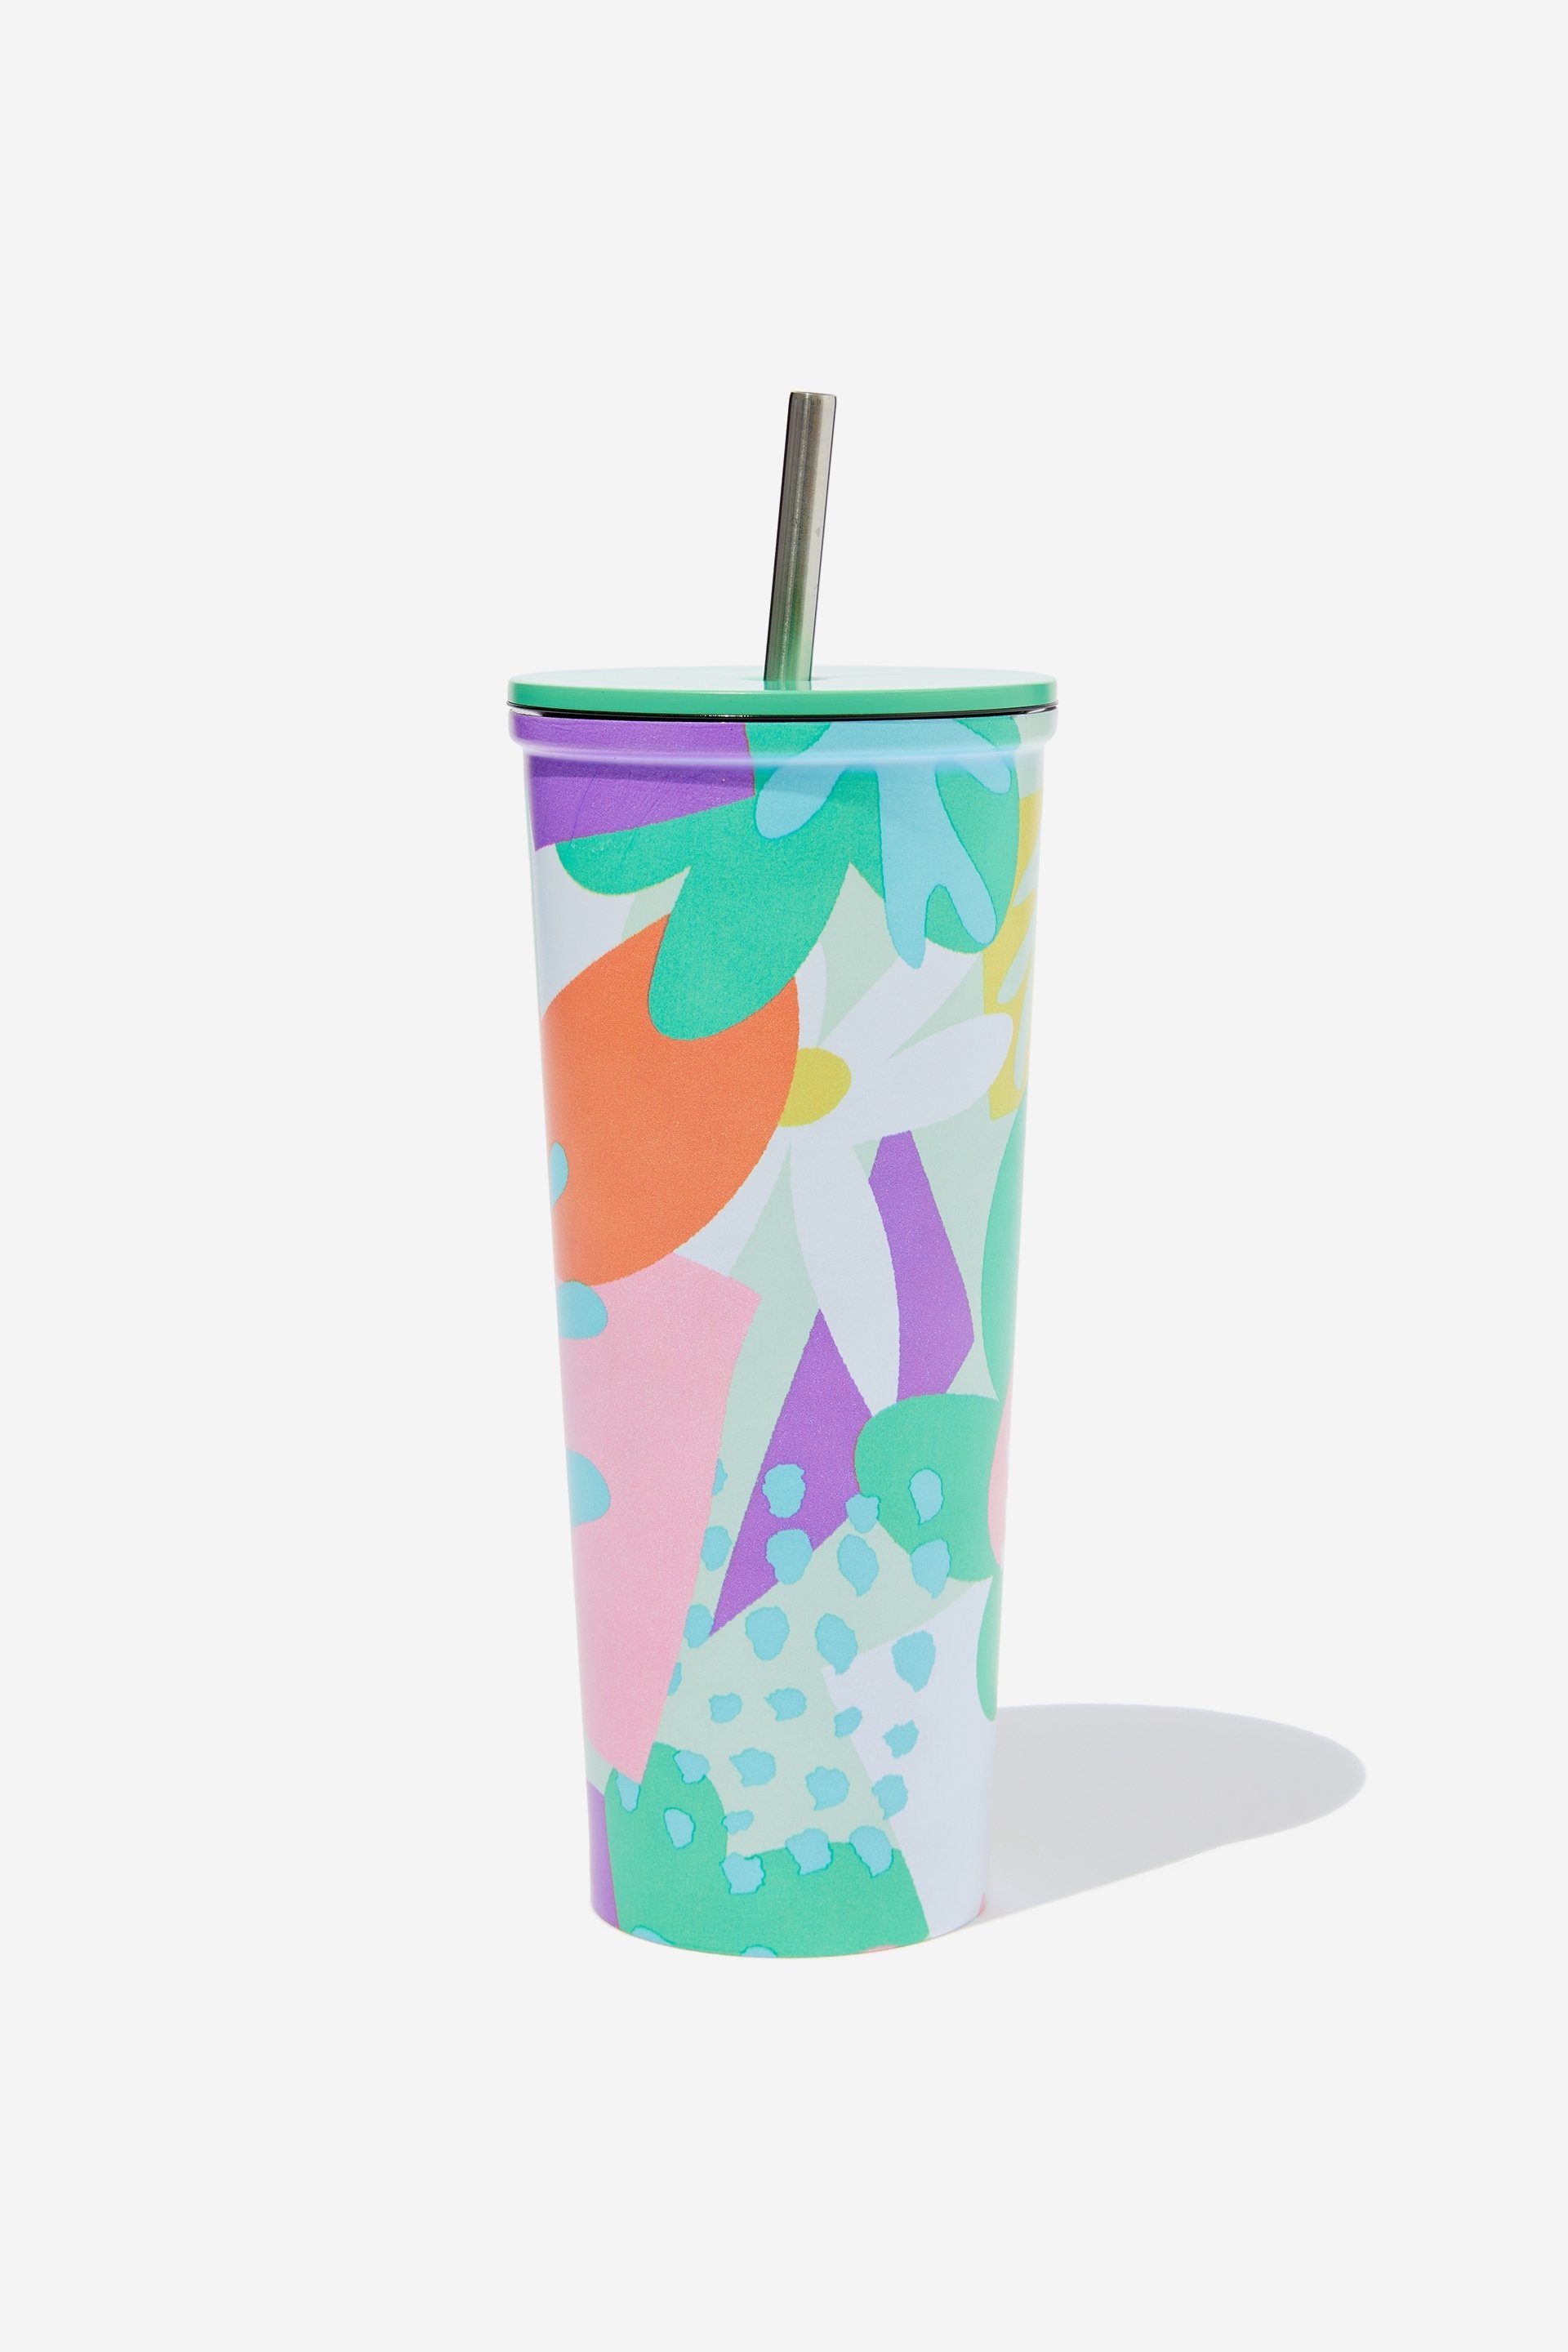 Typo - Metal Smoothie Cup - Abstract floral soft